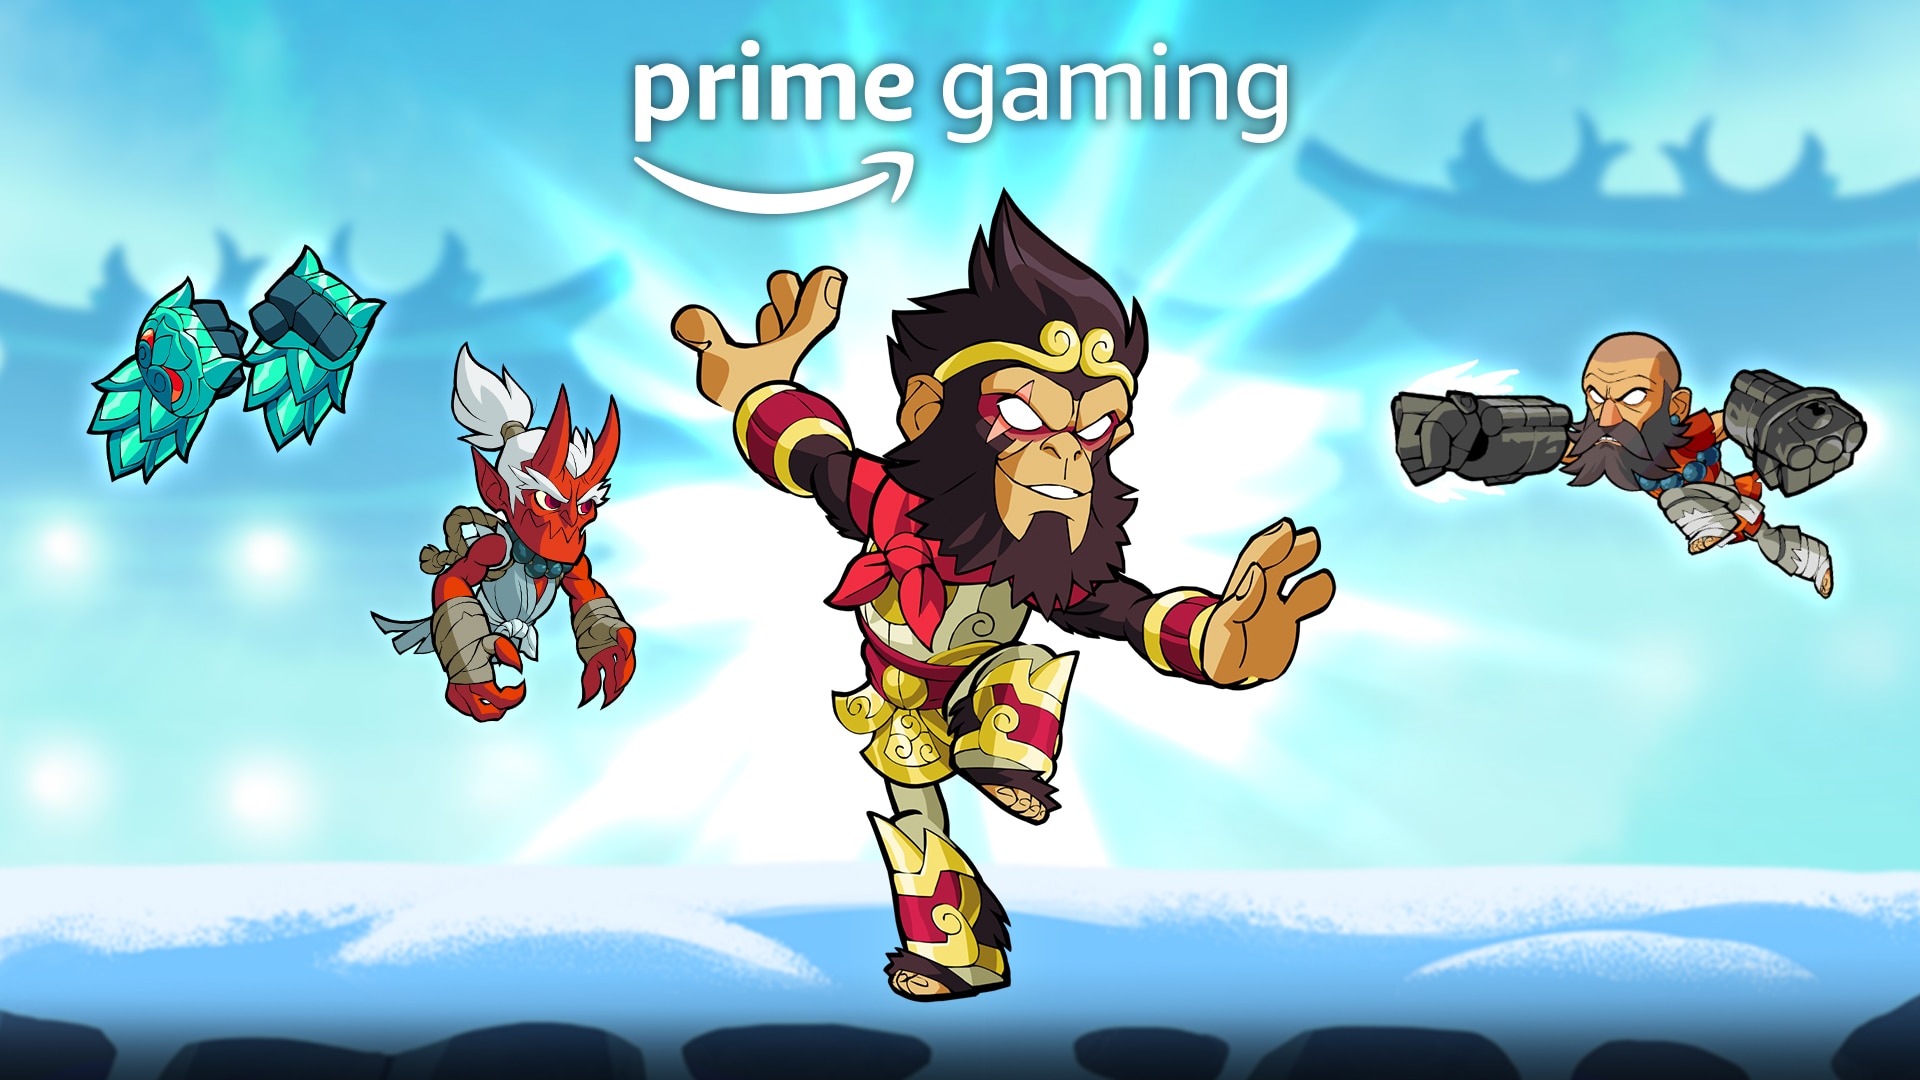 Future bundles of prime gaming? Is this accurate? : r/Brawlhalla